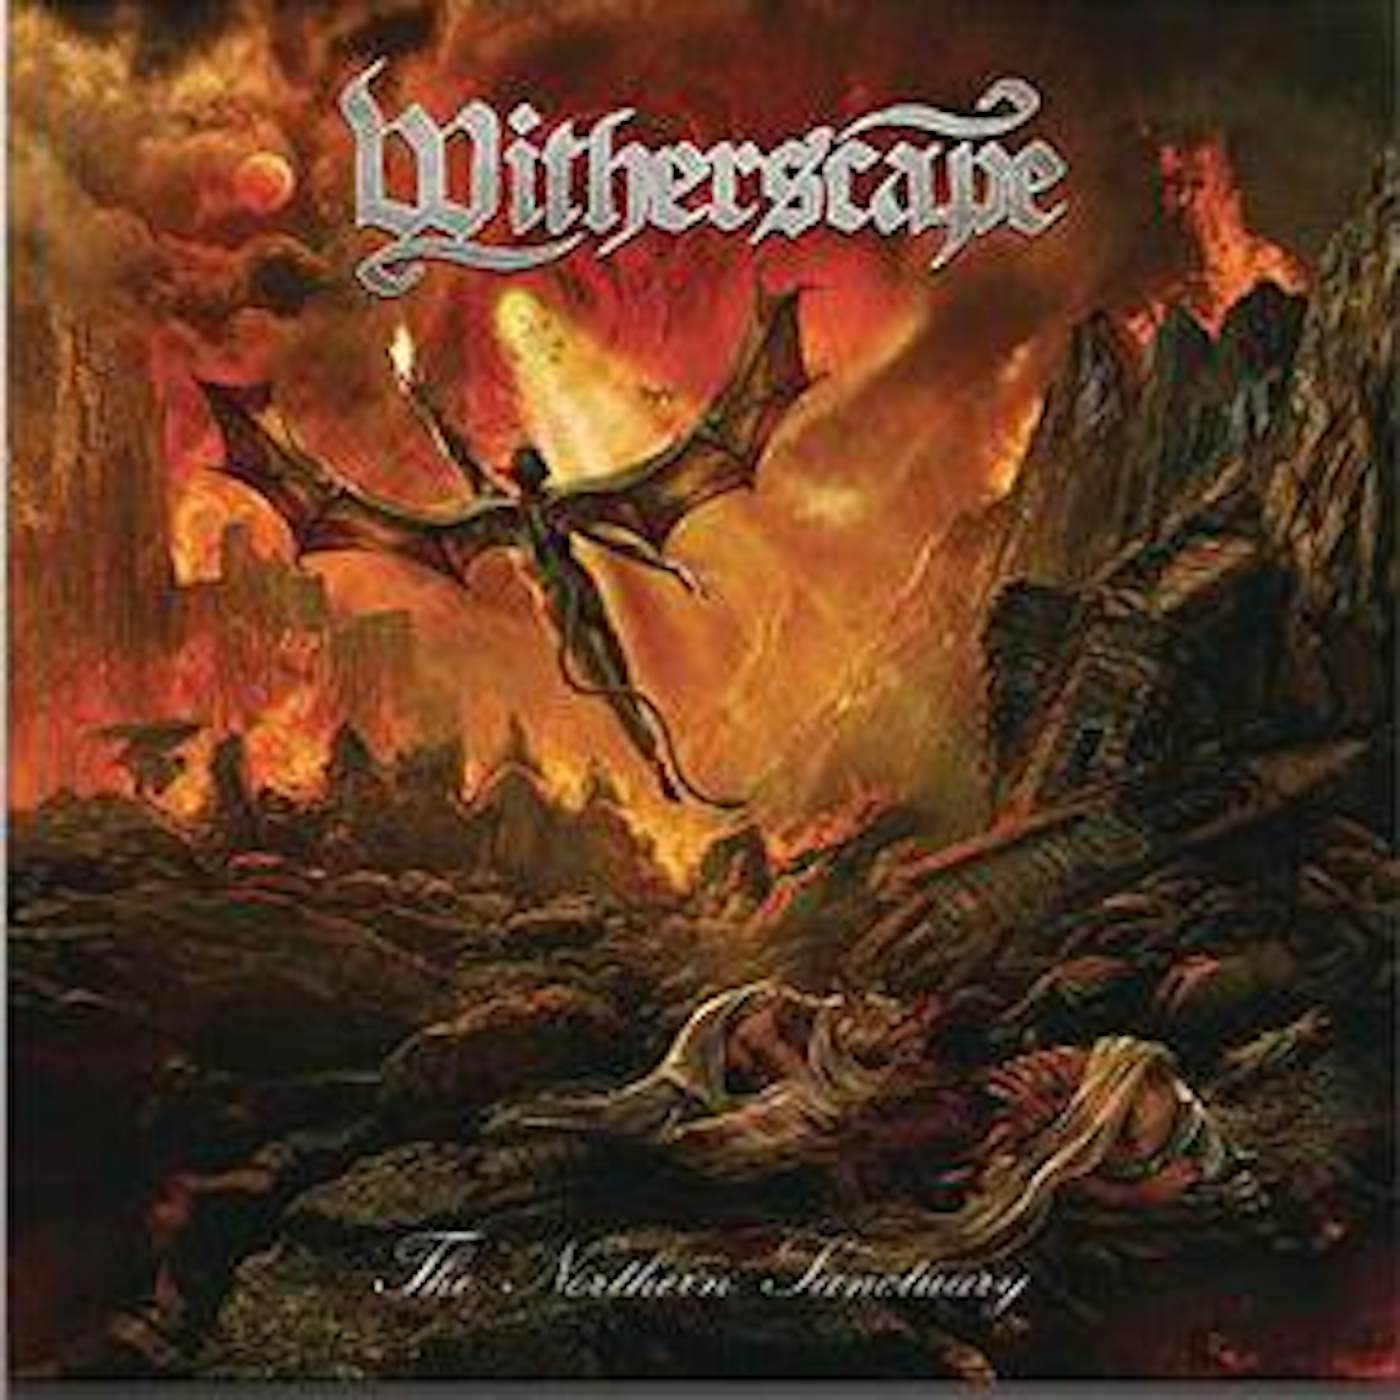 Witherscape NORTHERN SANCTUARY Vinyl Record - w/CD, Colored Vinyl, Gatefold Sleeve, Red Vinyl